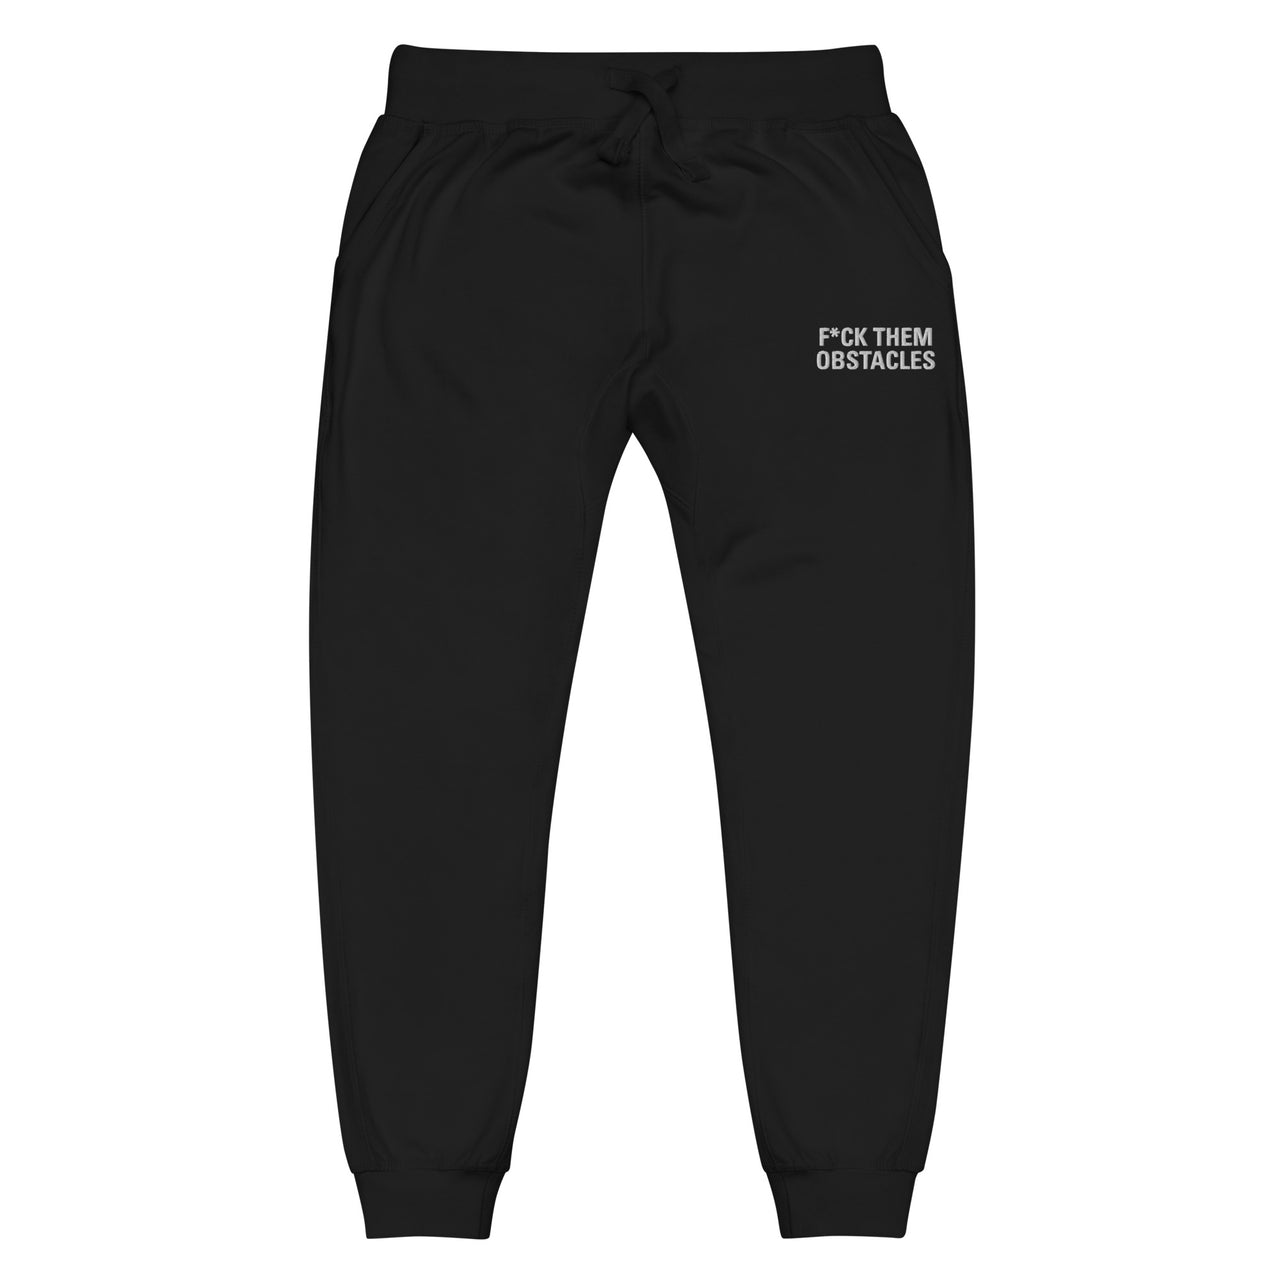 F*CK THEM OBSTACLES Embroidered Unisex Sweatpants